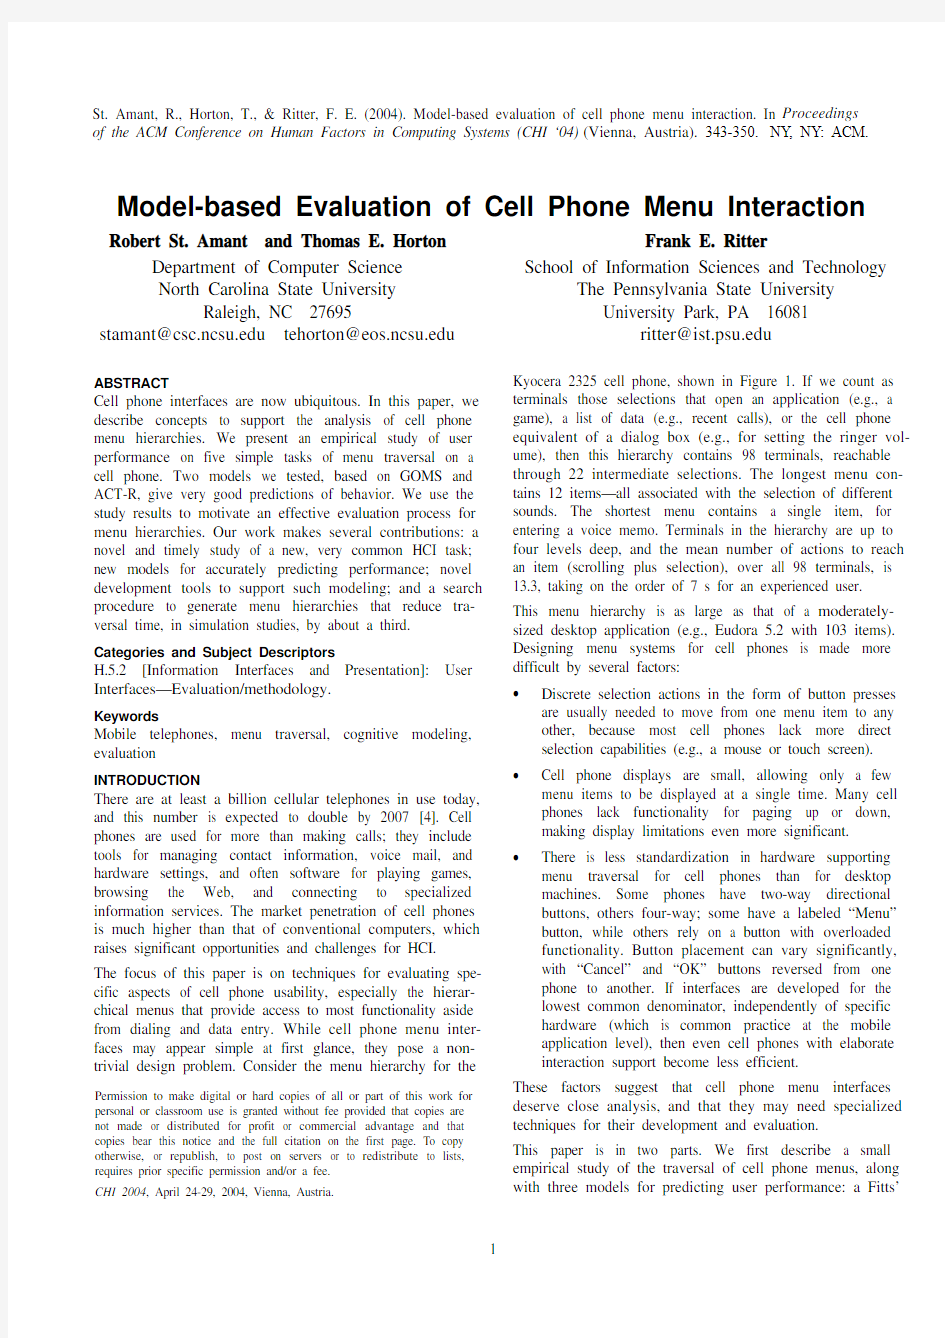 Model-based evaluation of cell phone menu interaction